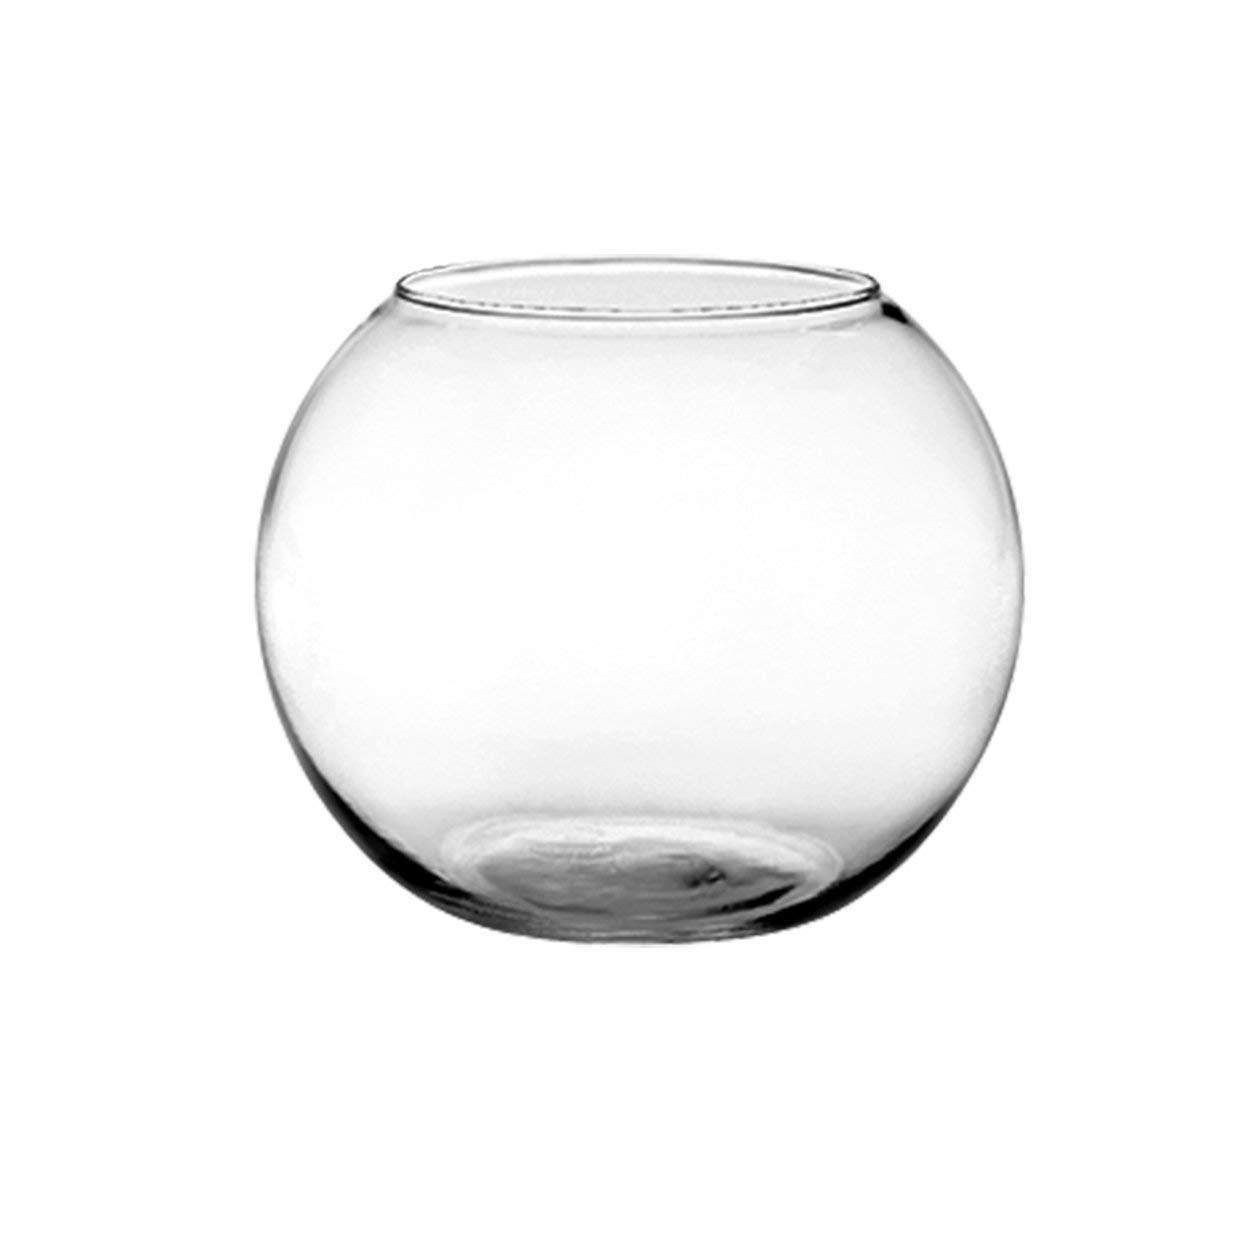 19 Amazing Plastic Bubble Bowl Vases 2024 free download plastic bubble bowl vases of amazon com set of 4 syndicate sales 6 inches clear rose bowl with amazon com set of 4 syndicate sales 6 inches clear rose bowl bundled by maven gifts garden outd